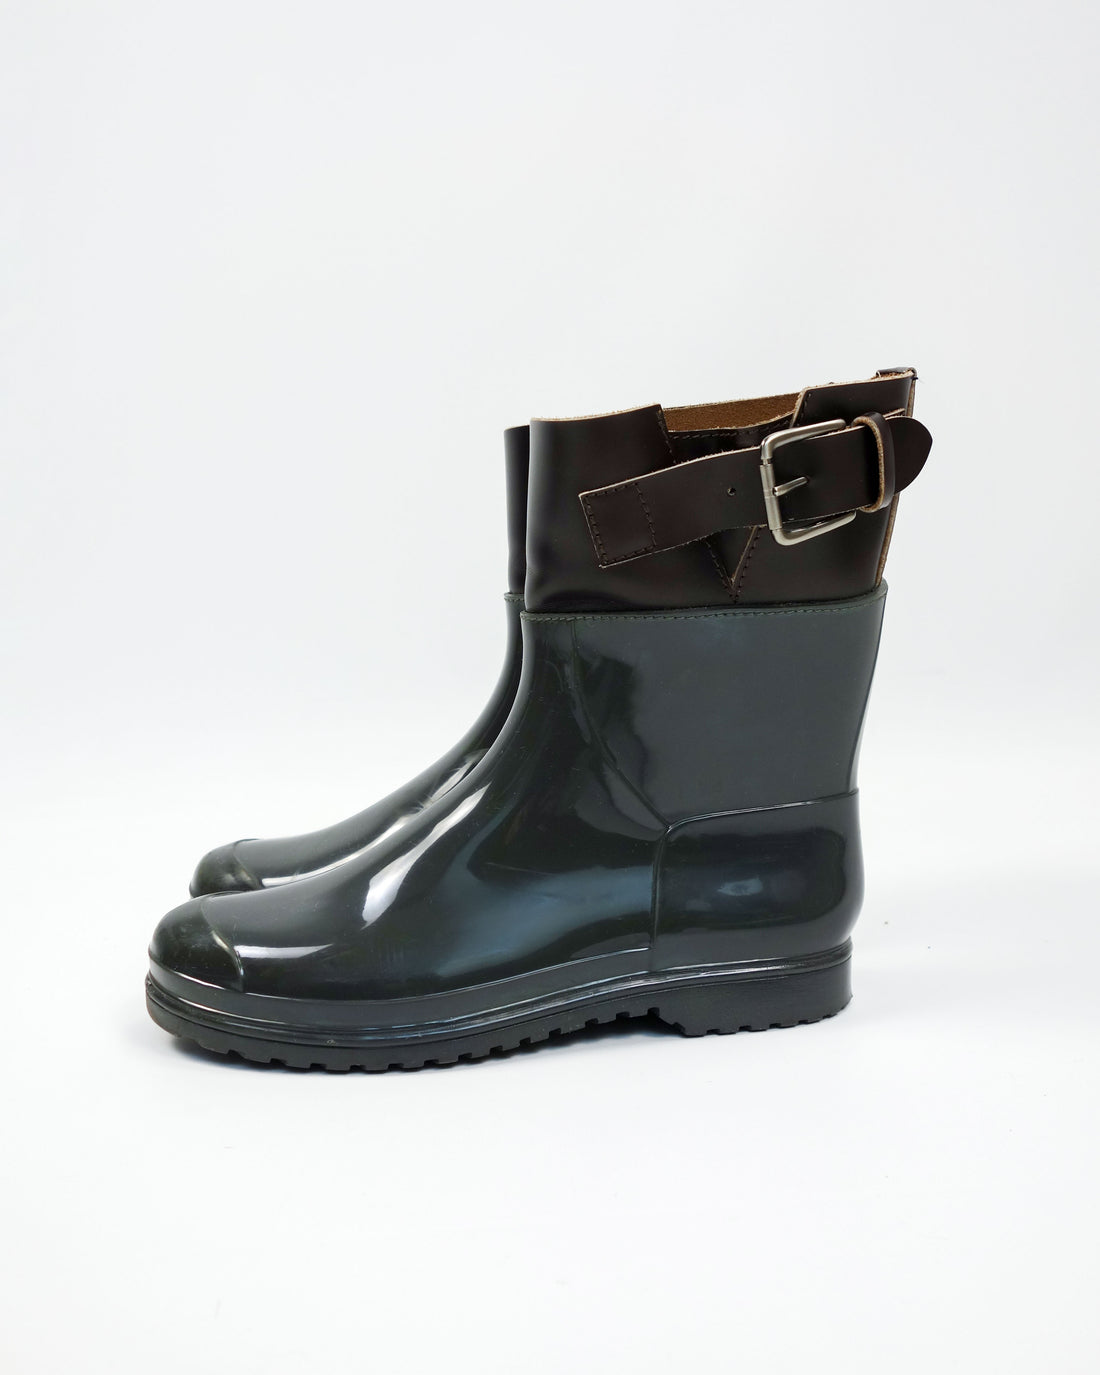 Marni Leather + Rubber Belted Raining Boots 2000's